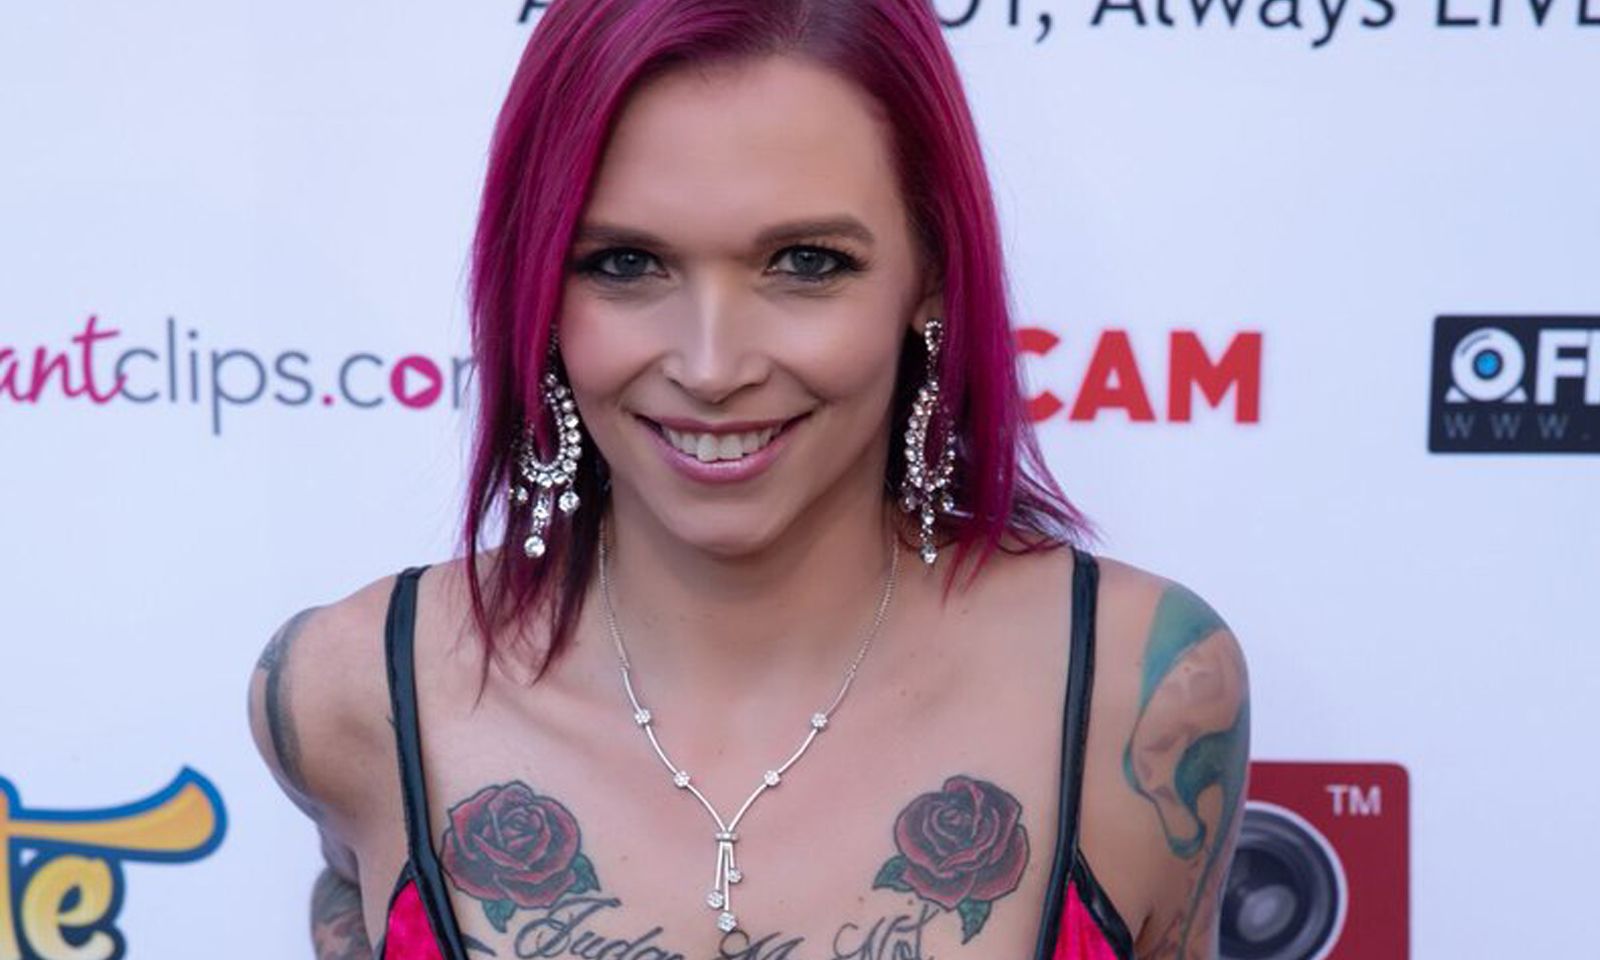 Anna Bell Peaks Nominated for 2018 AVN Awards MILF of the Year